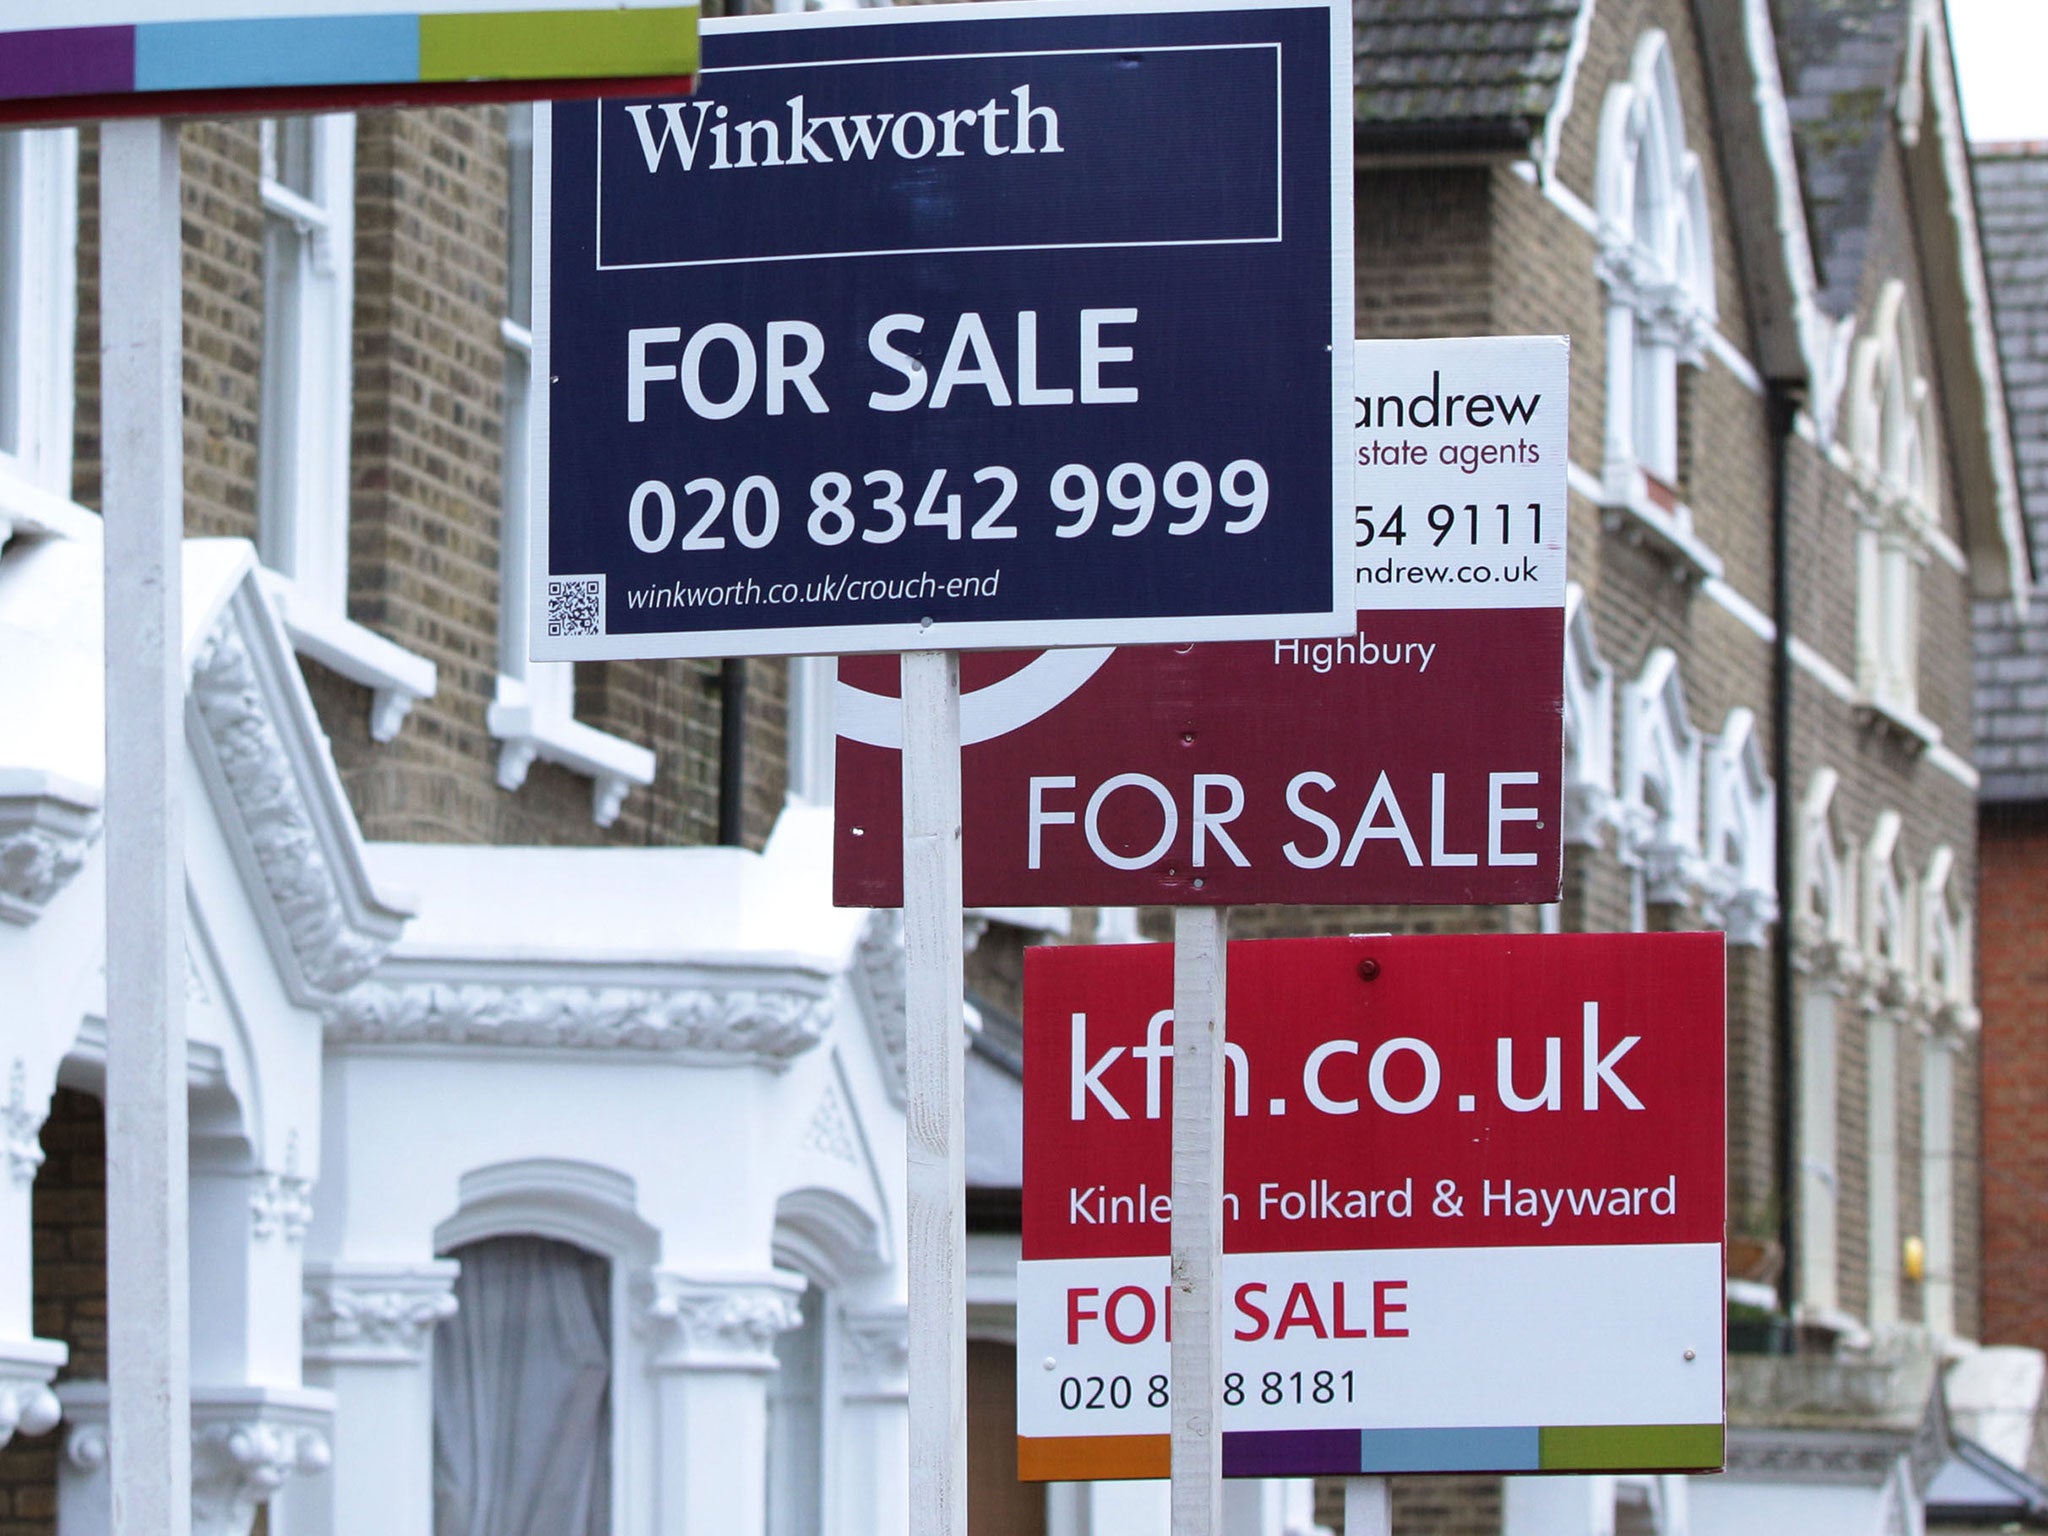 Annual house prices in London have risen 19.6 per cent